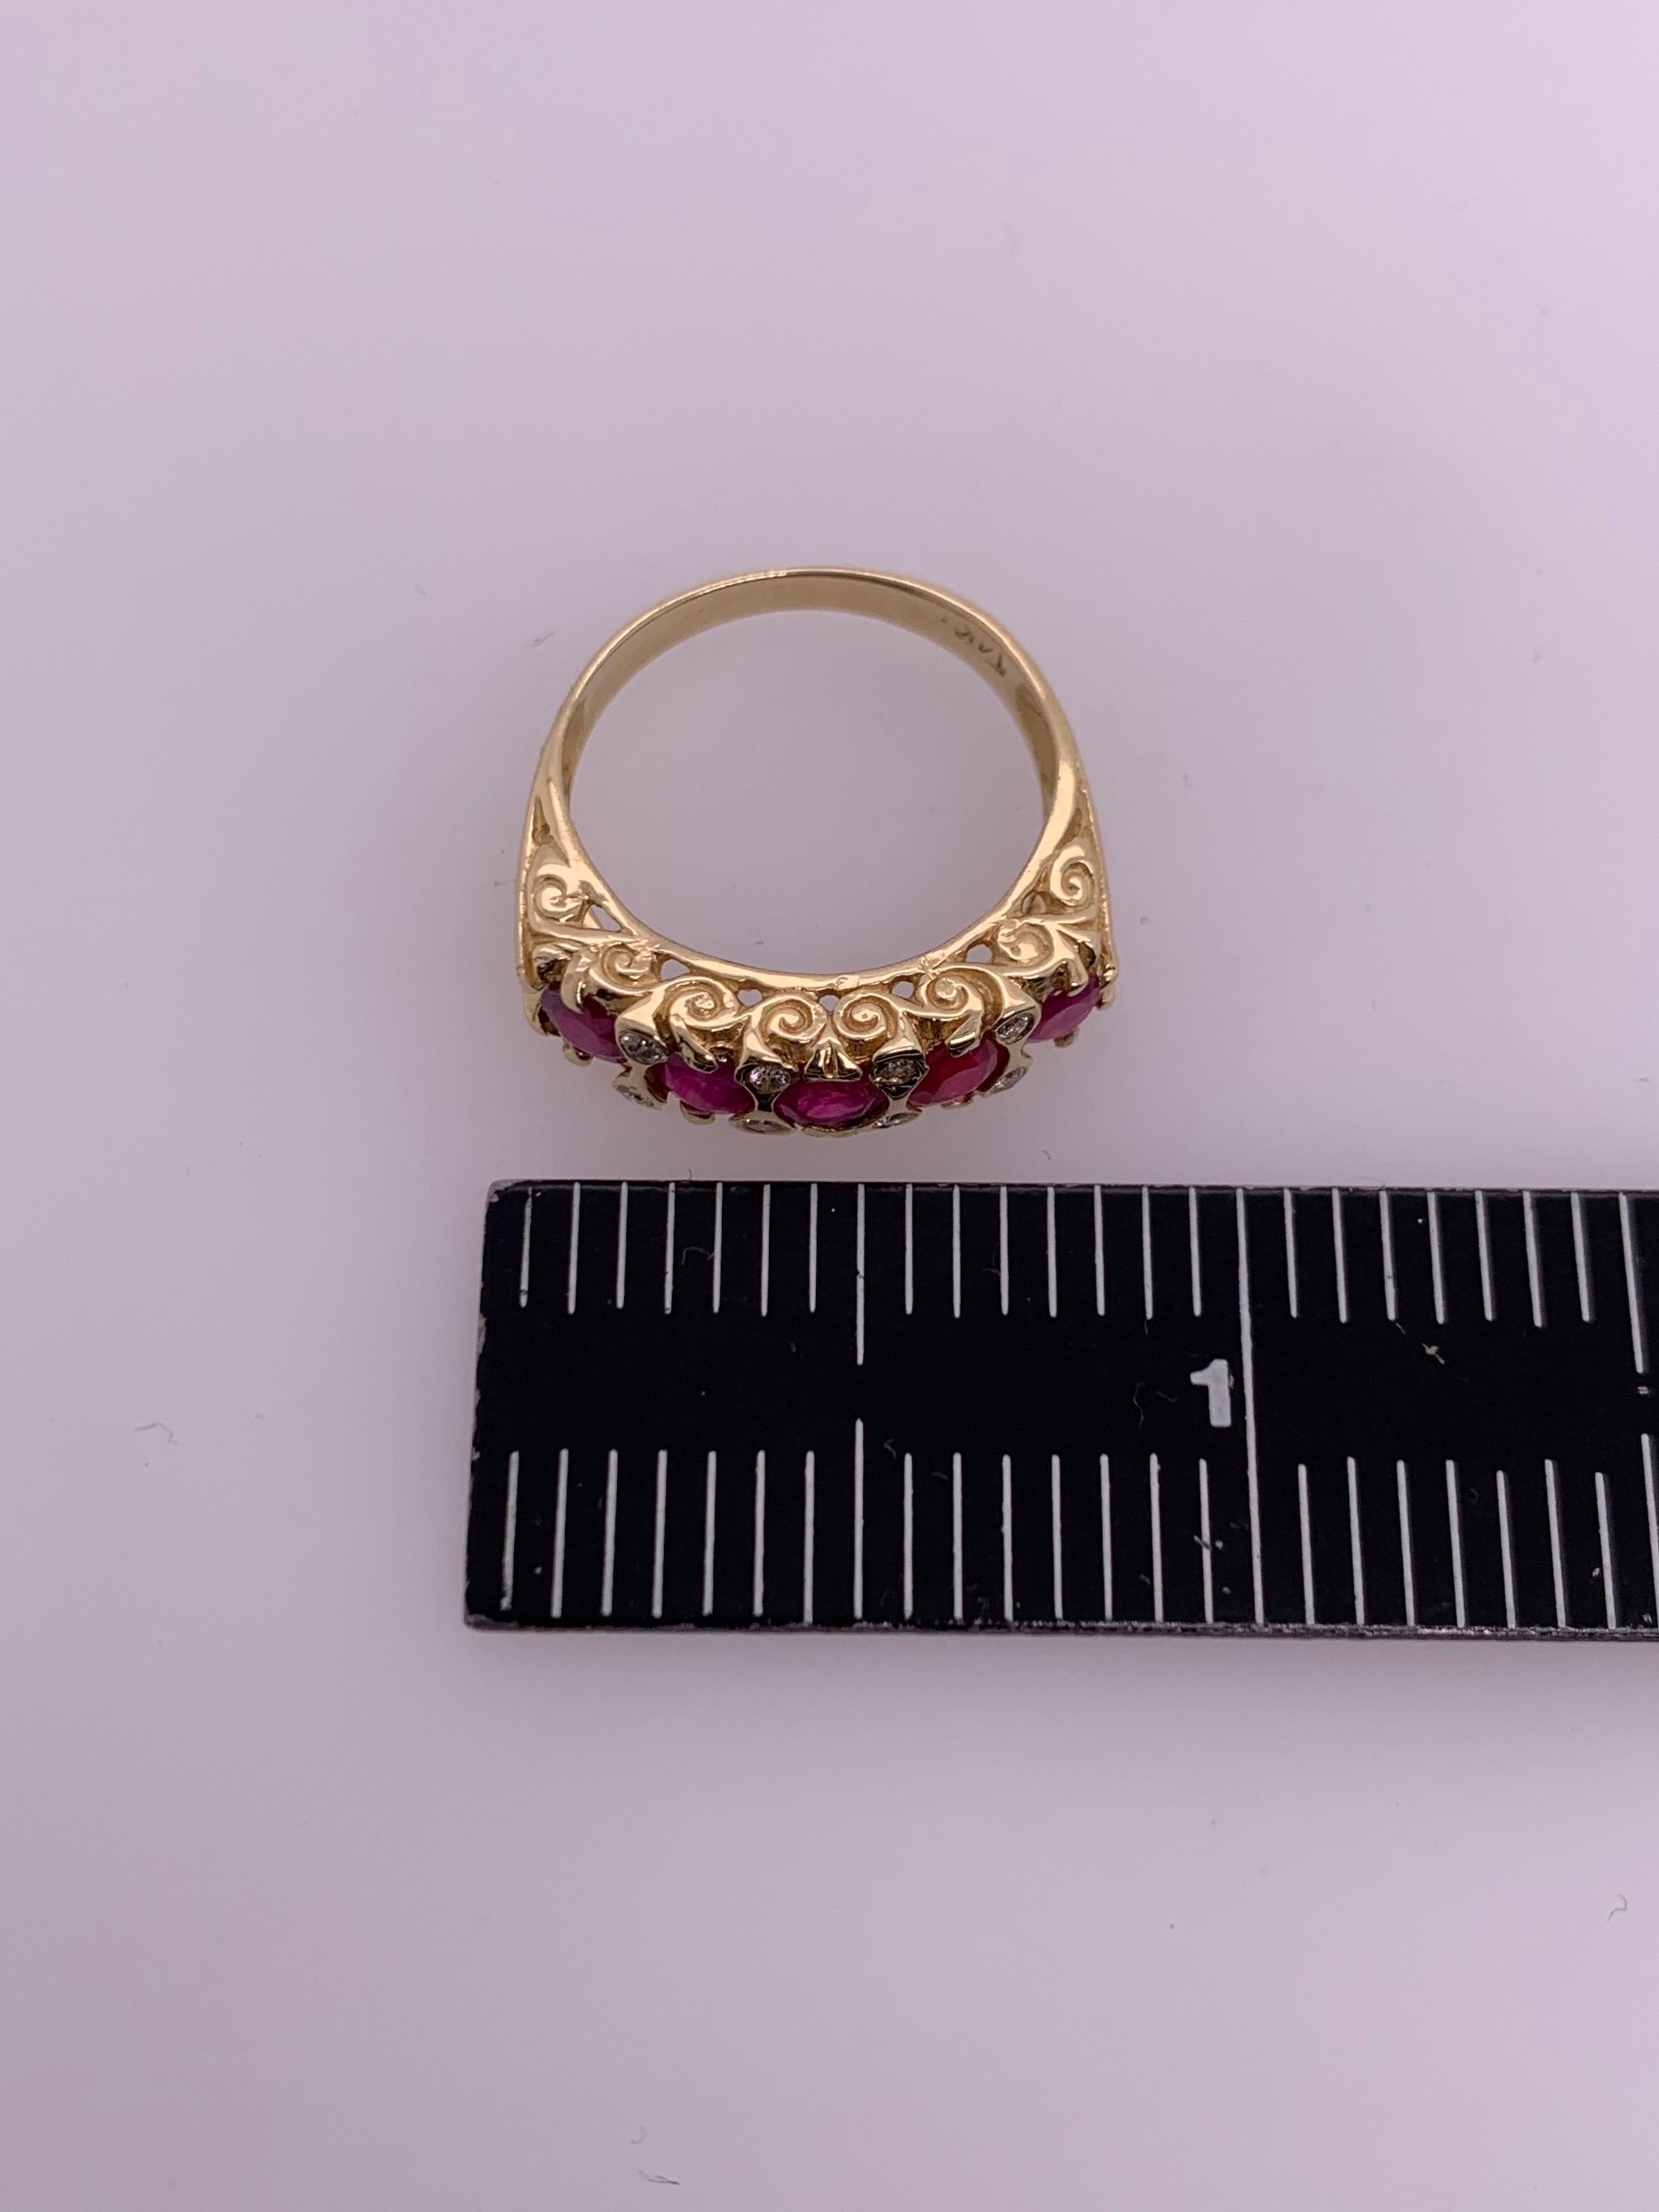 Retro Gold Cocktail Ring 1.10 Carat Round Natural Ruby & Diamond Gem circa 1960 For Sale 3